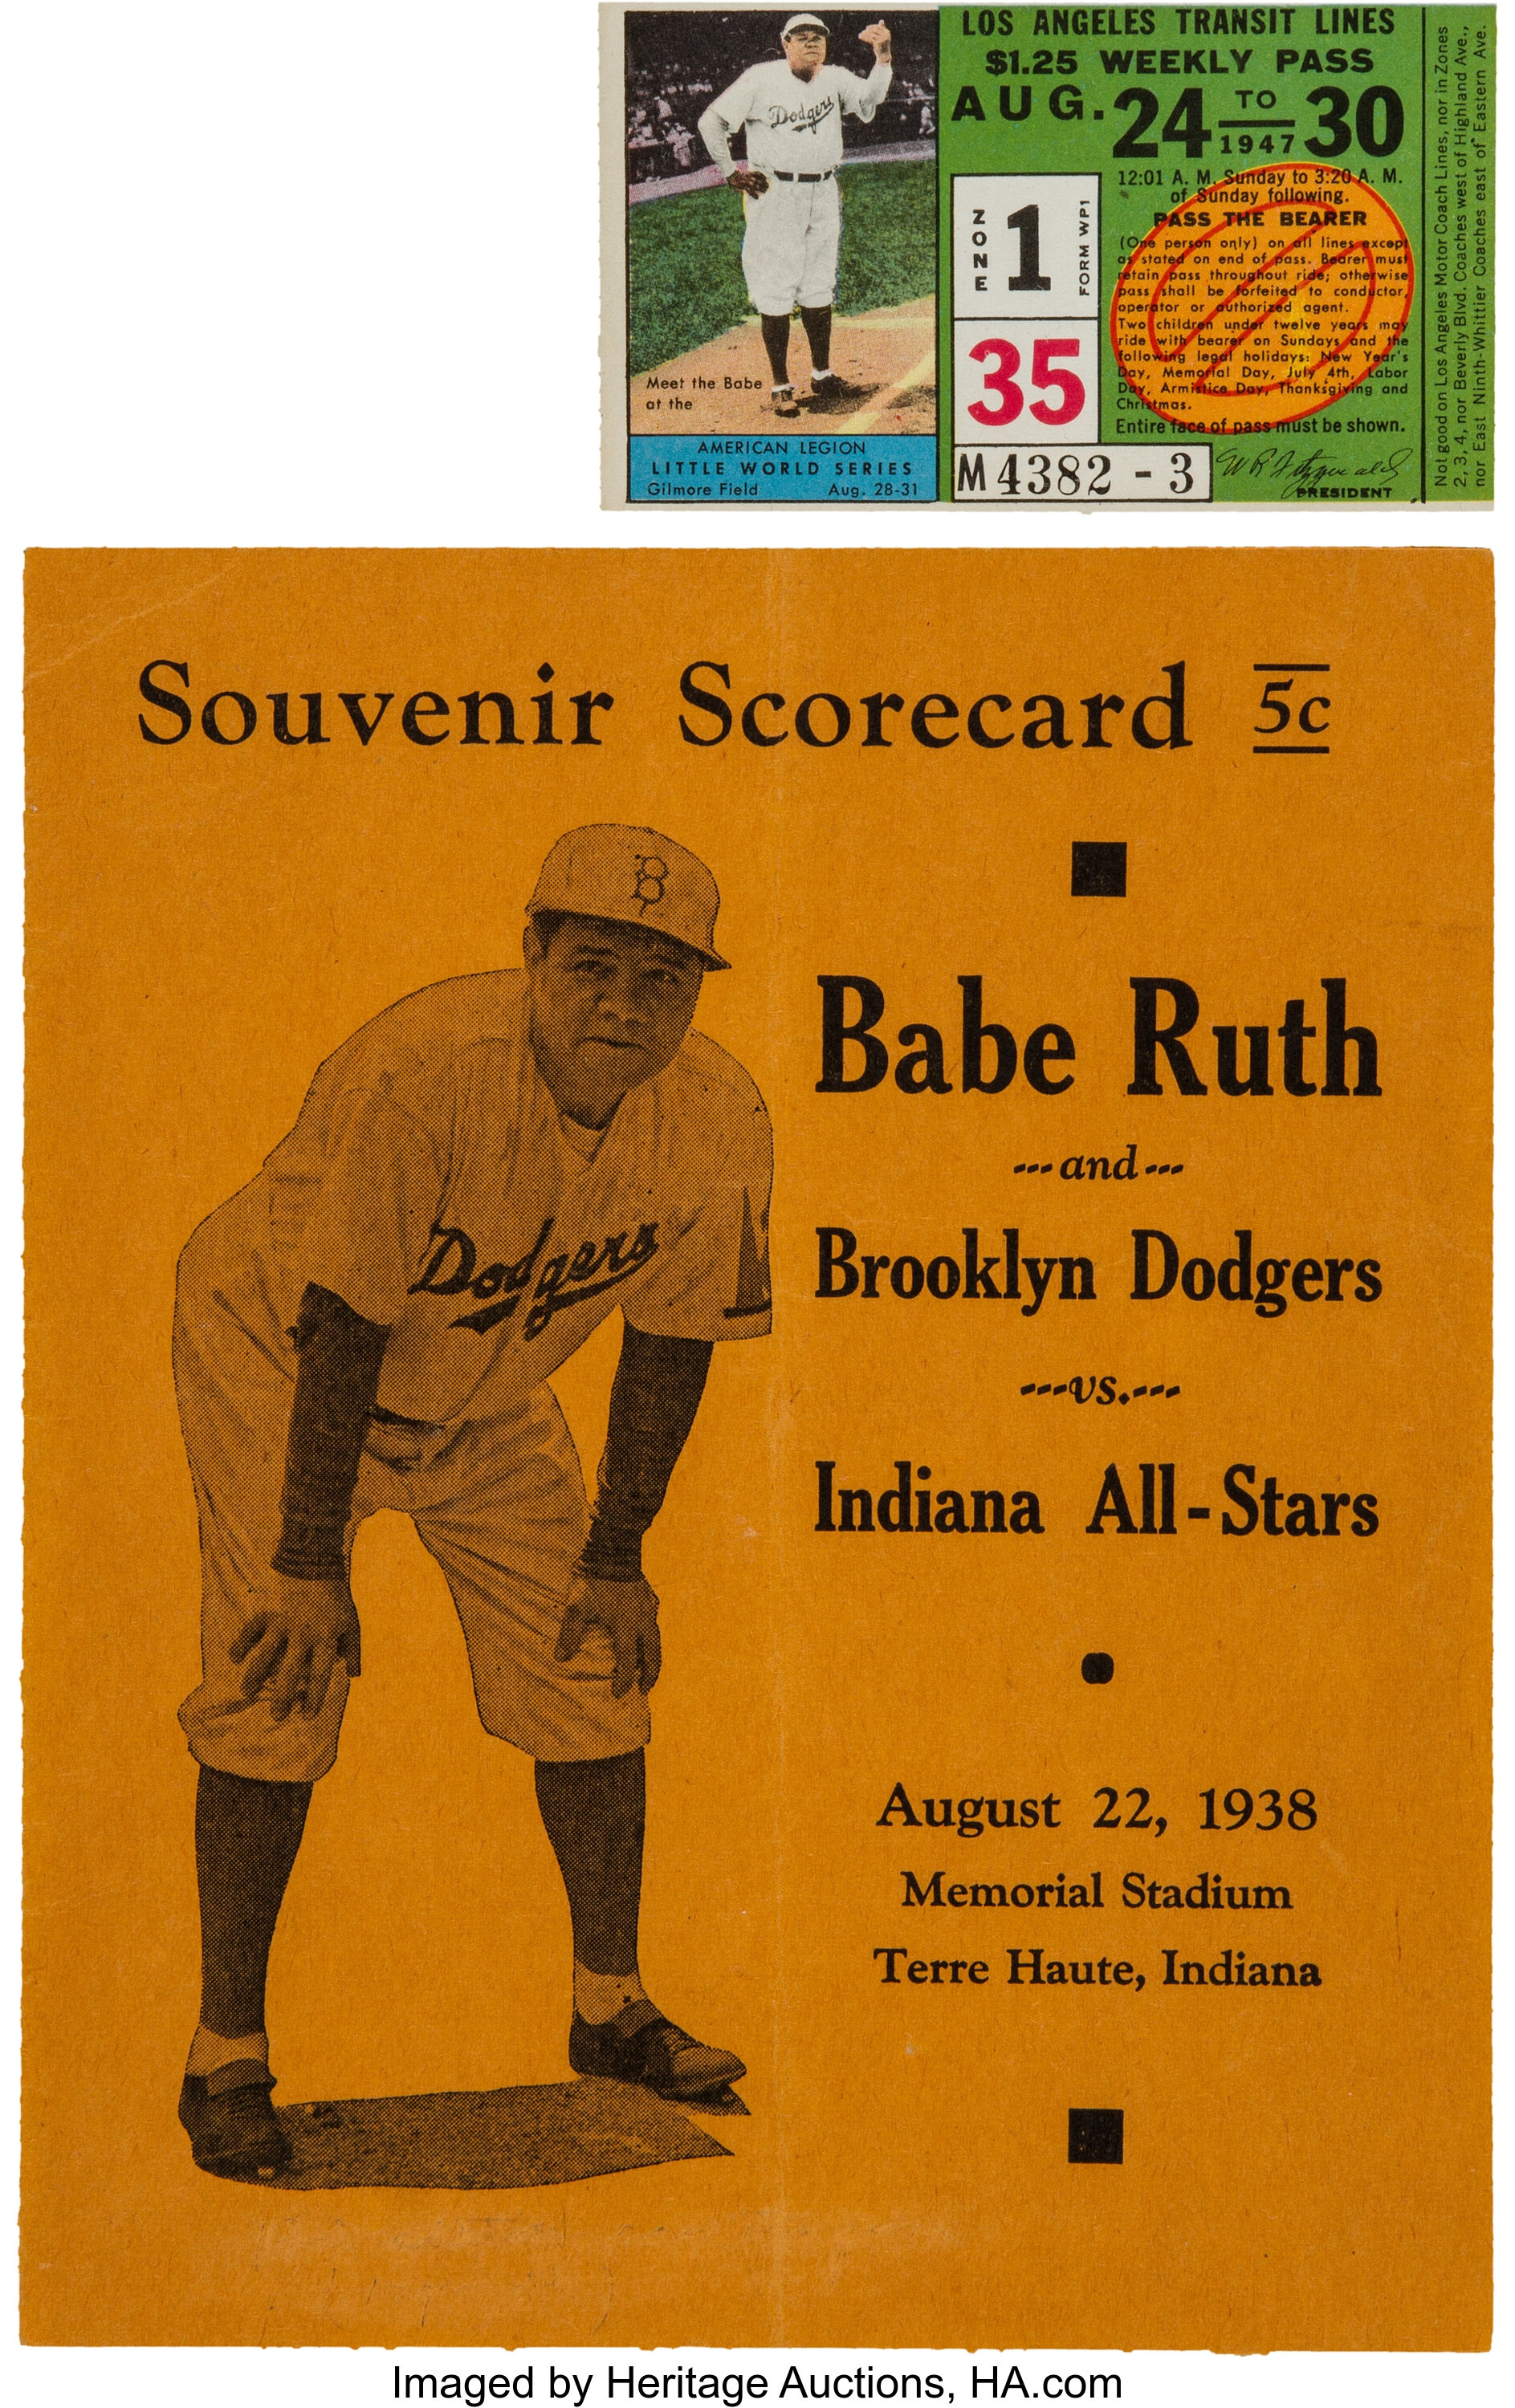 babe ruth dodgers